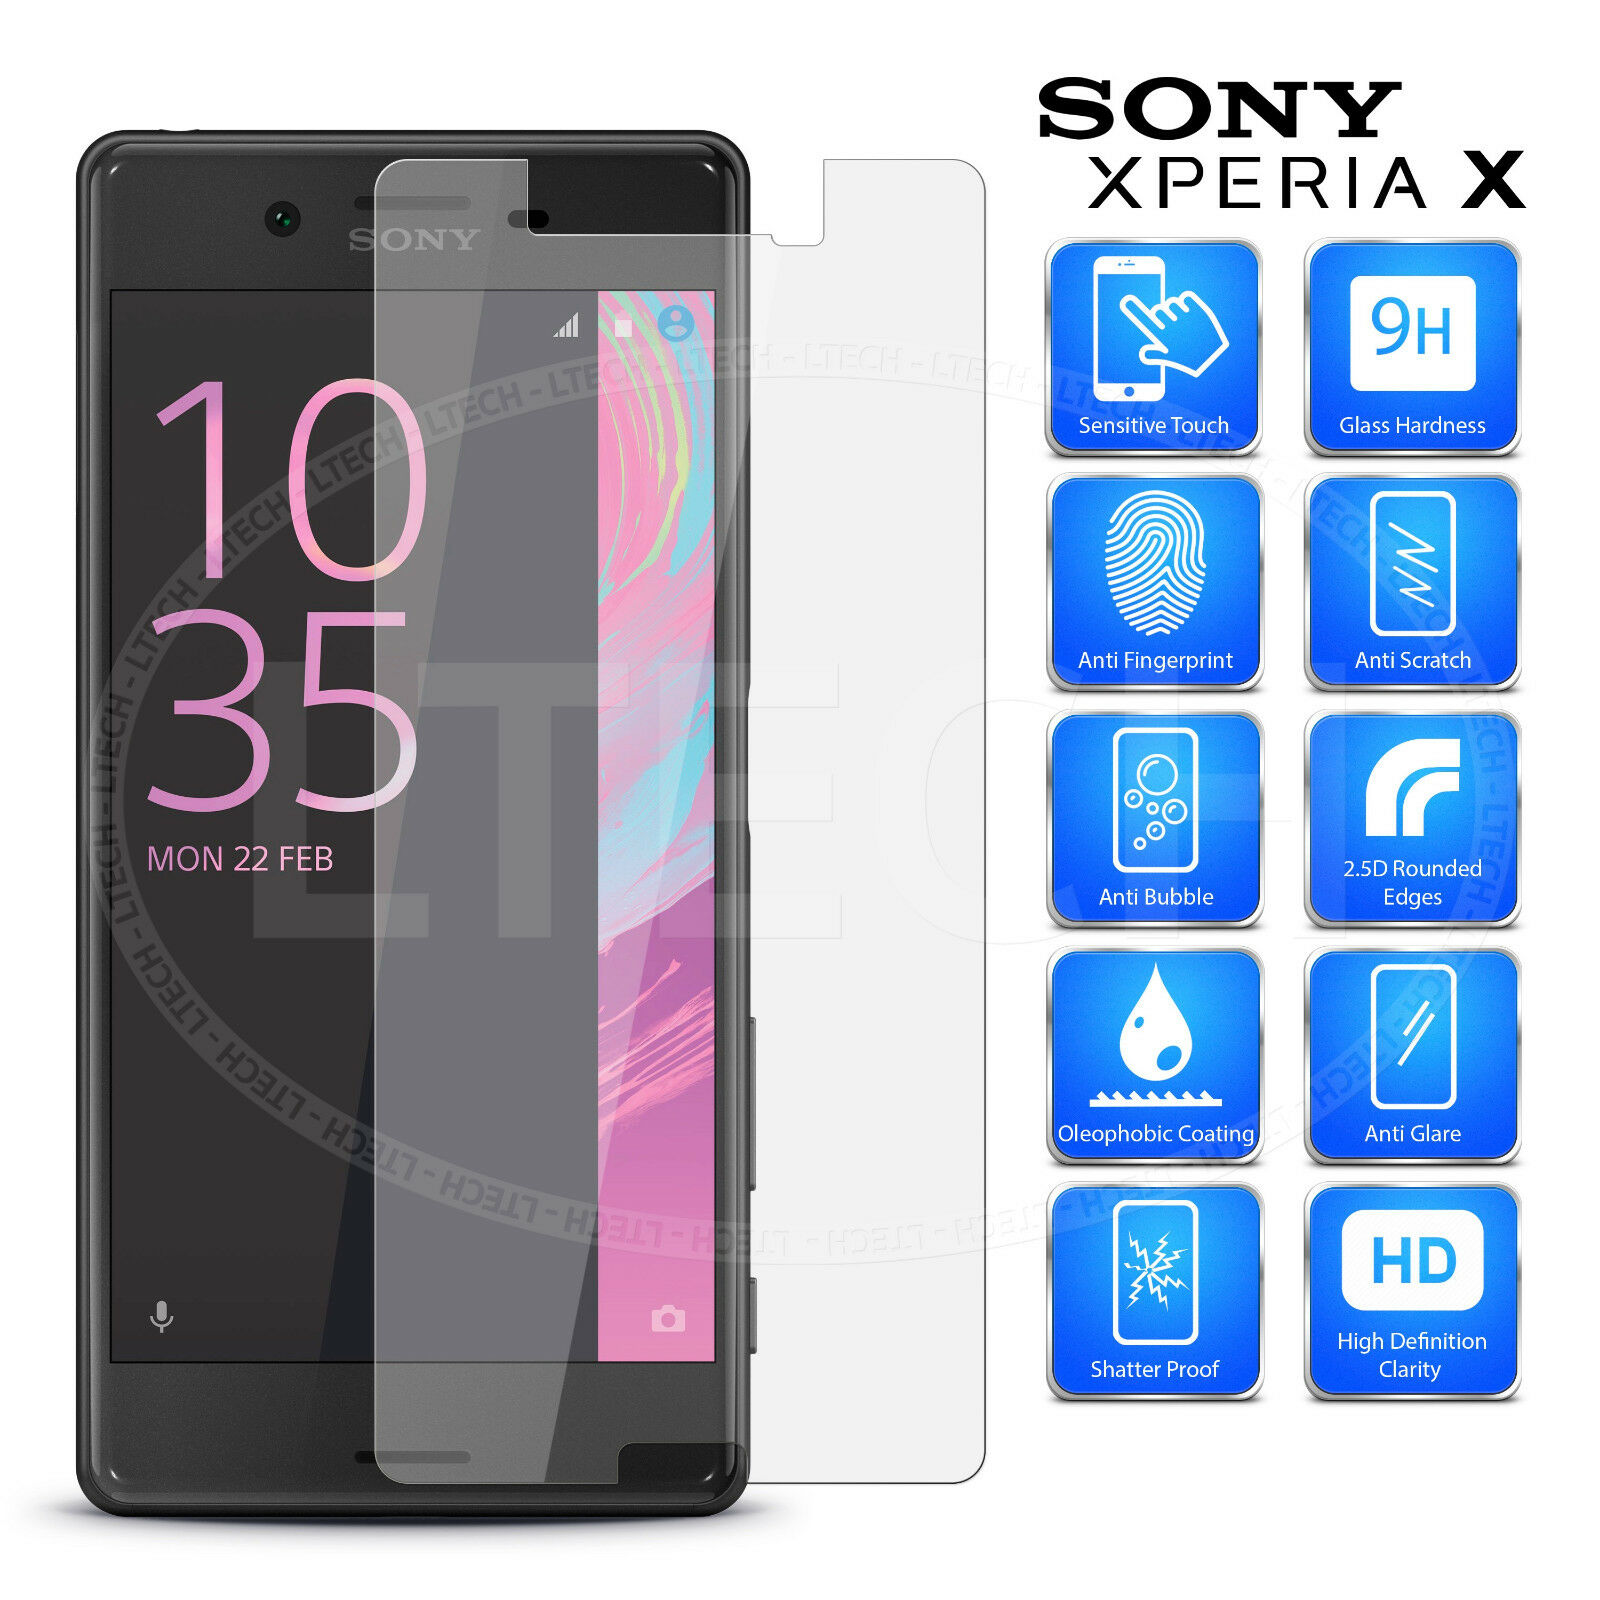 SYP-TG: Premium Tempered Glass Screen Protector for Sony Smart Phone